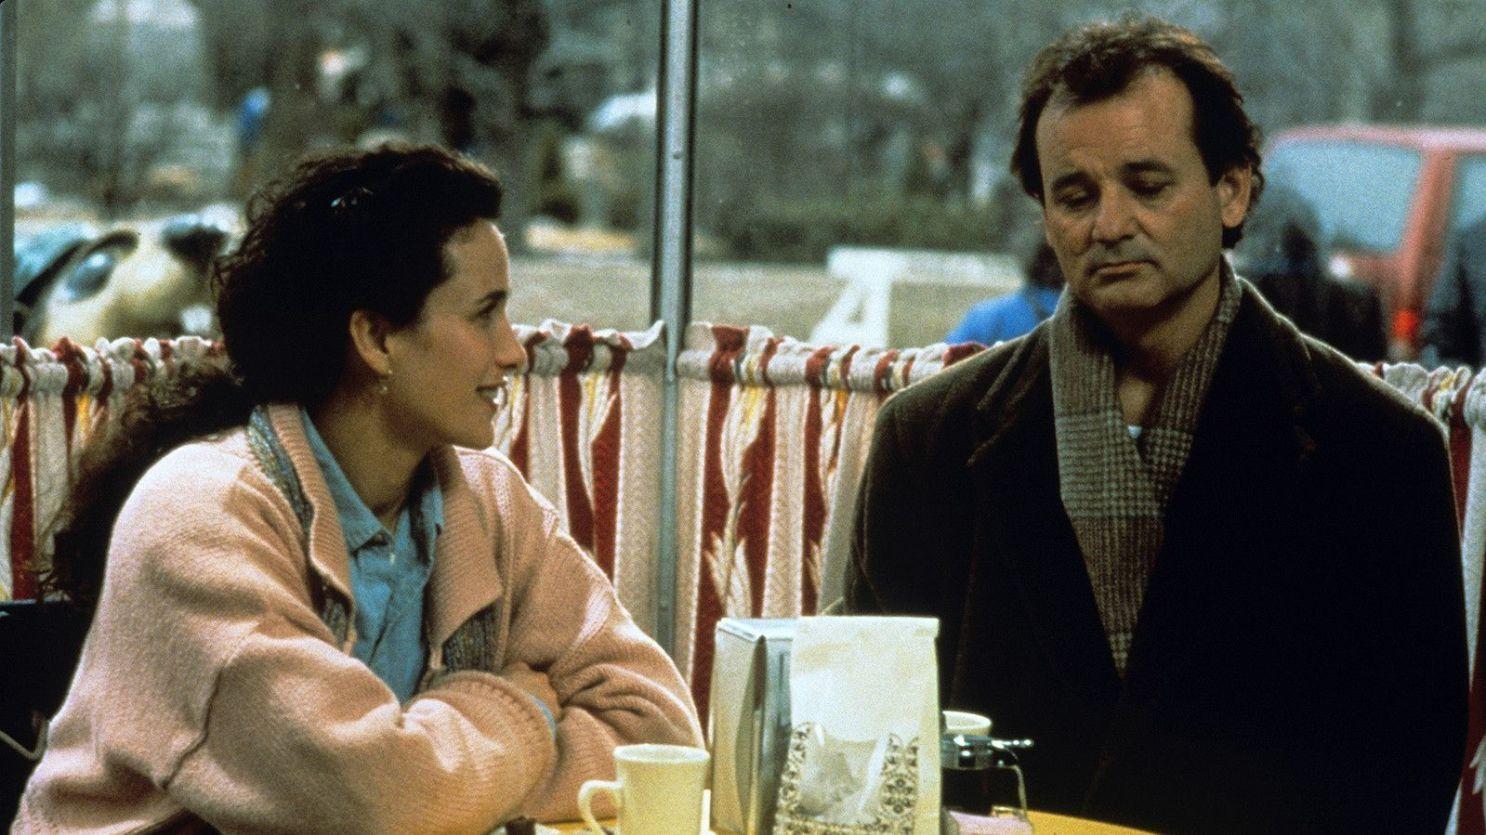 This is a screen still from Groundhog Day. A man and a woman sit at a table in. a breakfast restaurant. The man looks down and upset.